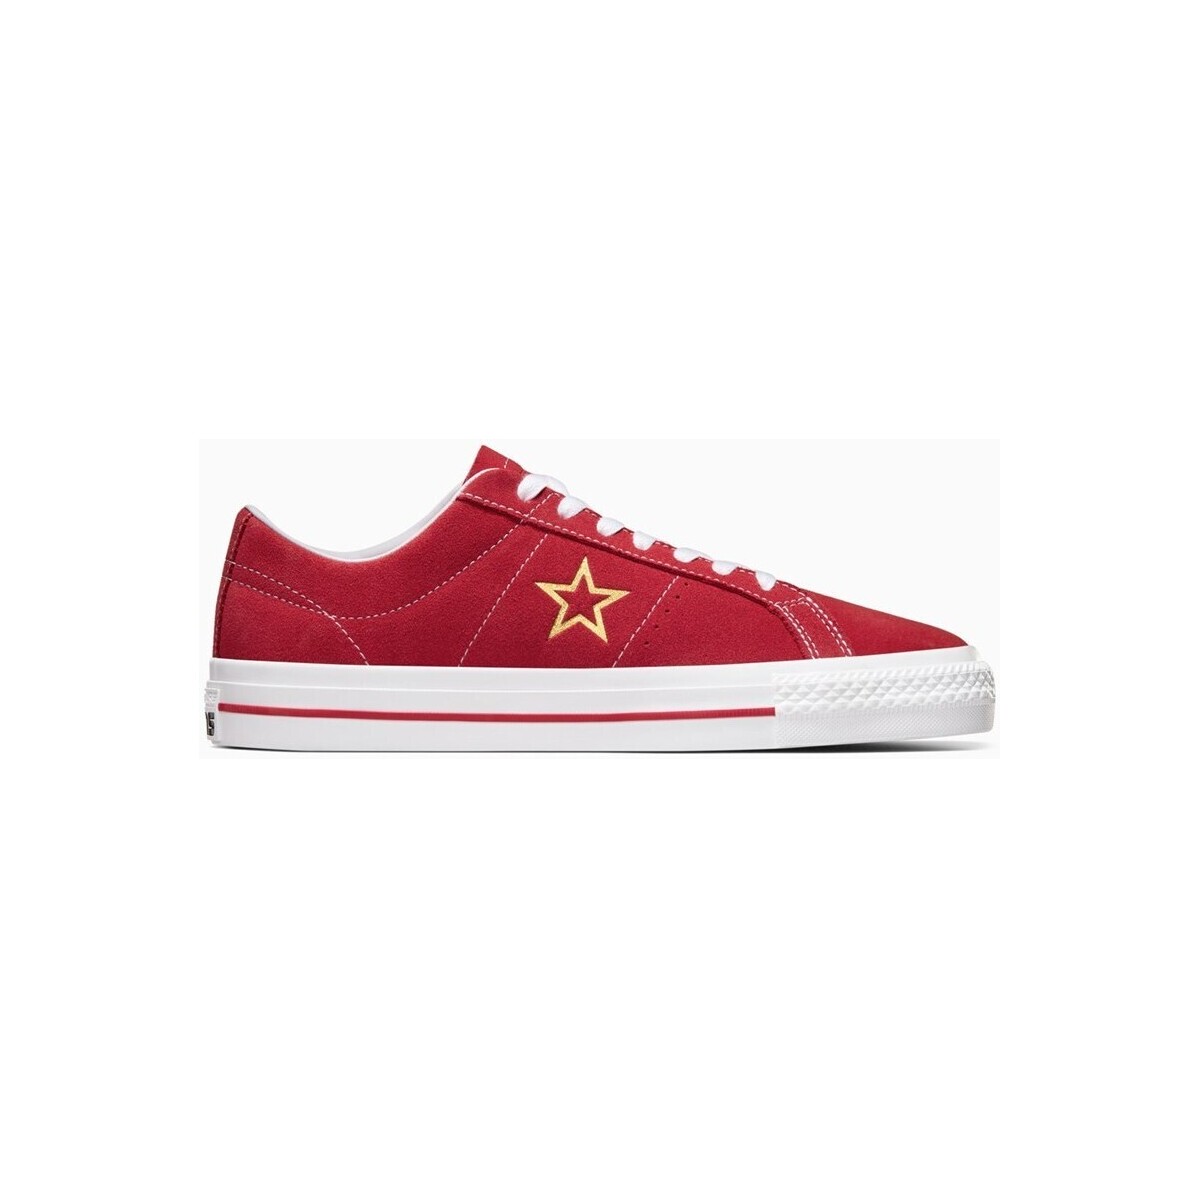 Converse One Star Pro Ox Red